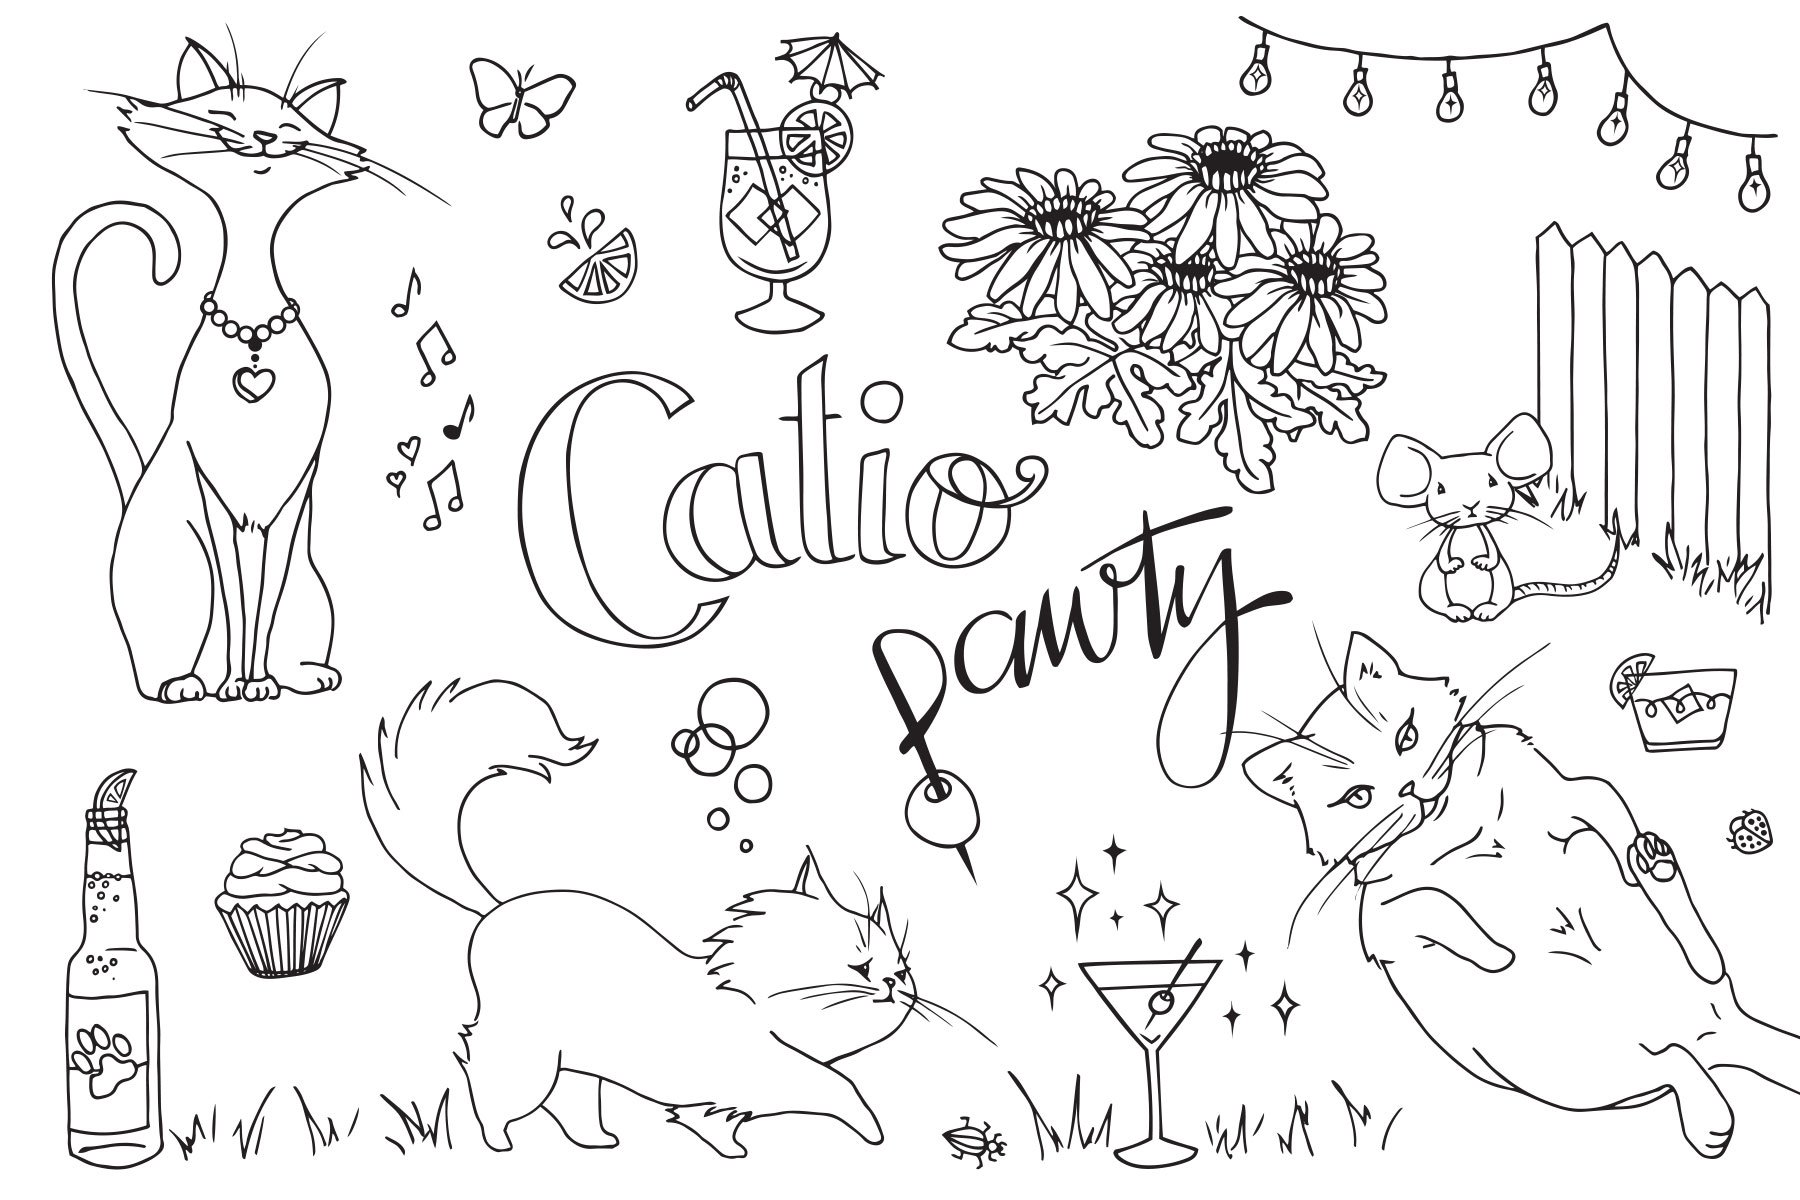 Catio Pawty: From Hand Drawn to Vector Illustration